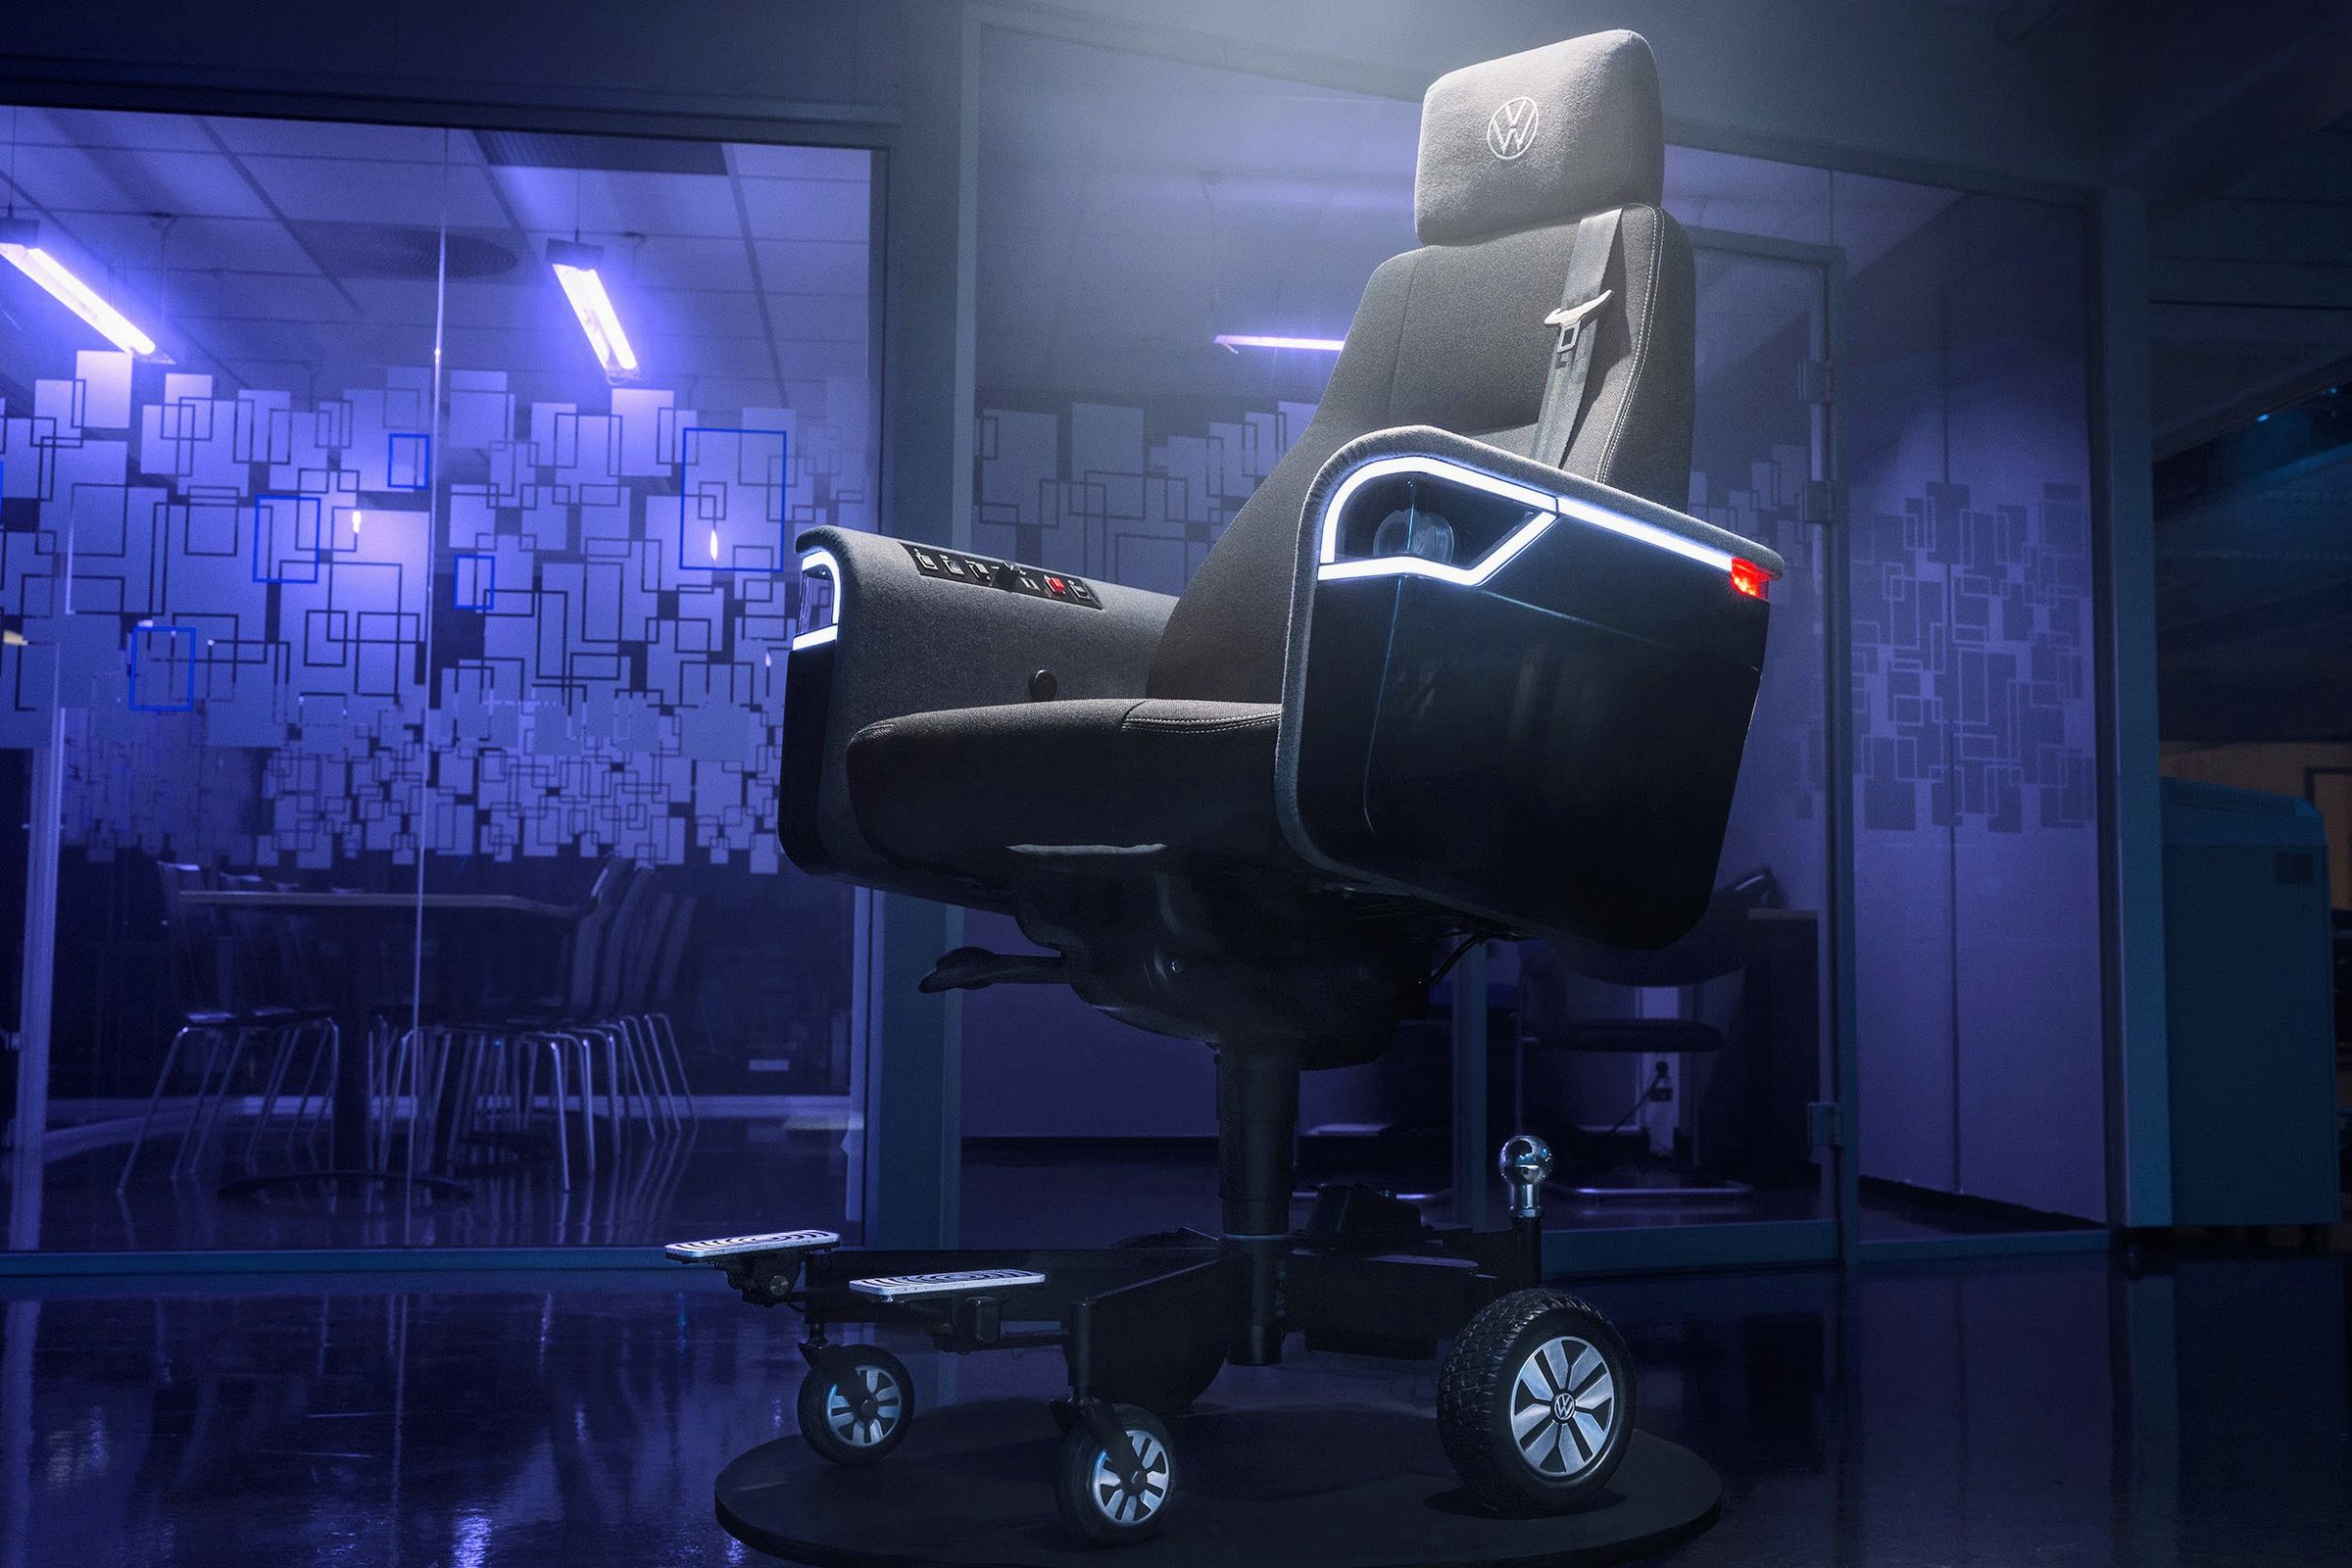 Volkswagen’s chair is ready to party with LED trim around its working headlights, but it’s also ready to drive with a car seatbelt and dedicated metal footrests. The mostly black chair is depicted here in a purple-lit office space with glass doors.